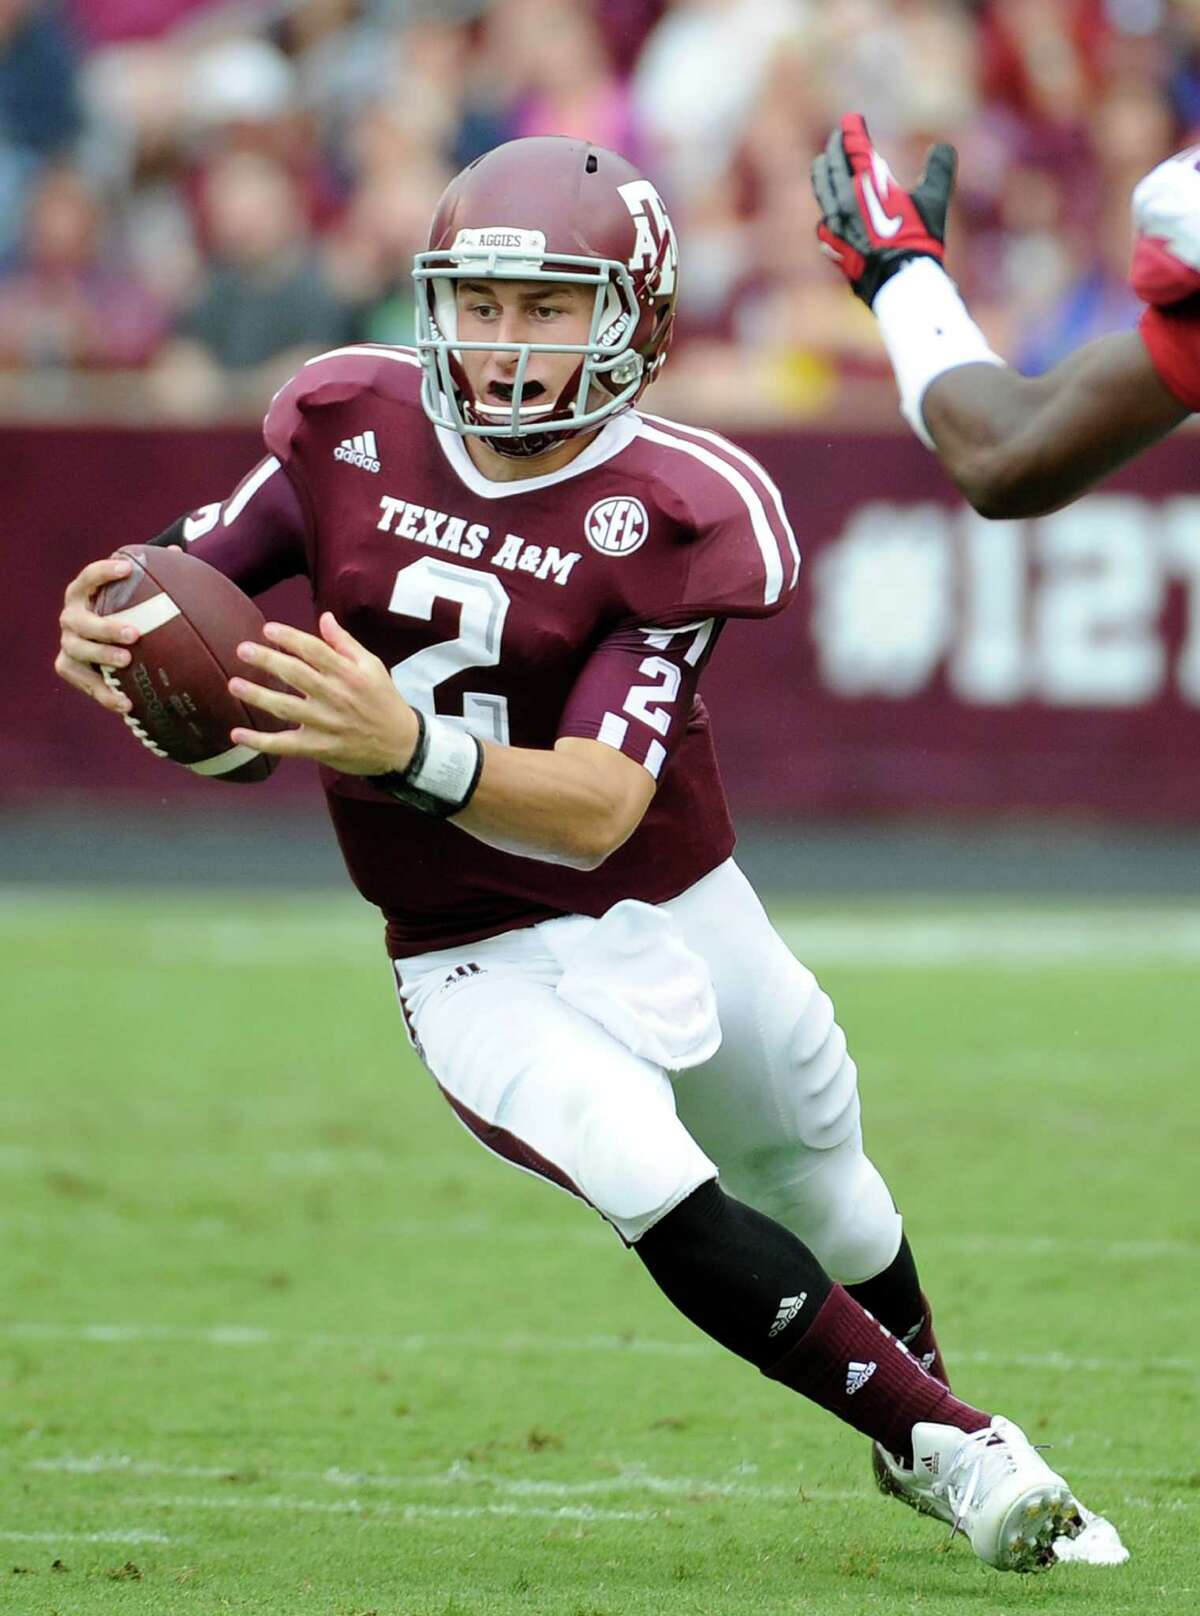 A&M’s Johnny Manziel broke the SEC record for total yards last week. He had 557, surpassing the 540 of Ole Miss’s Archie Manning (1969) and LSU’s Rohan Davey (2001).